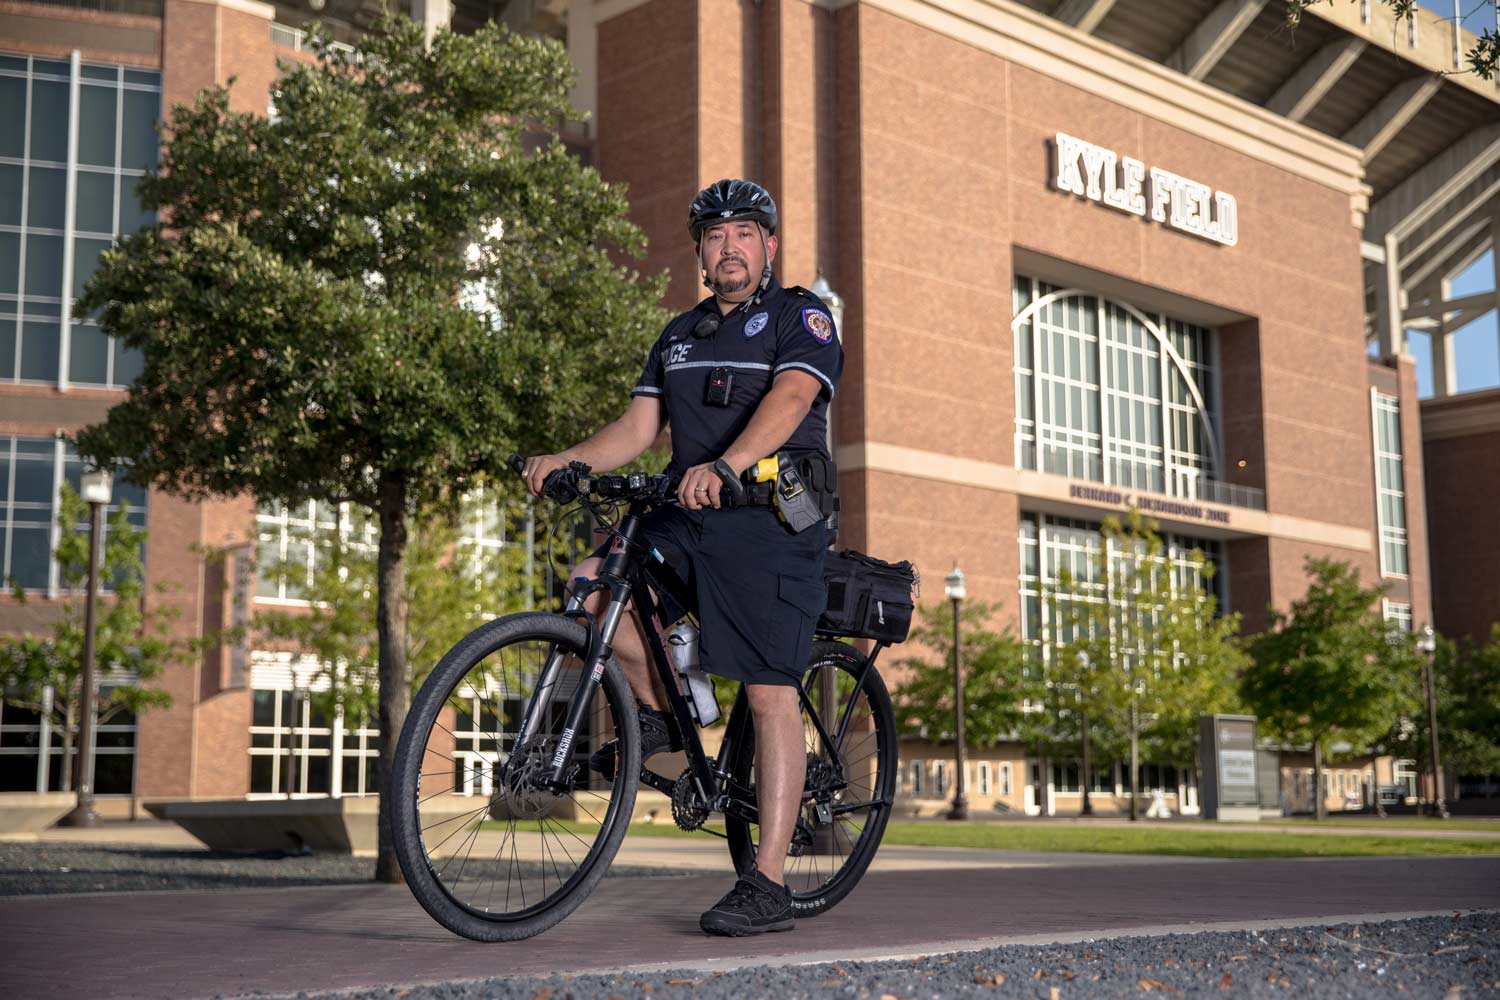 University police officer posing on a bicycle in front of Kyle Field on campus.